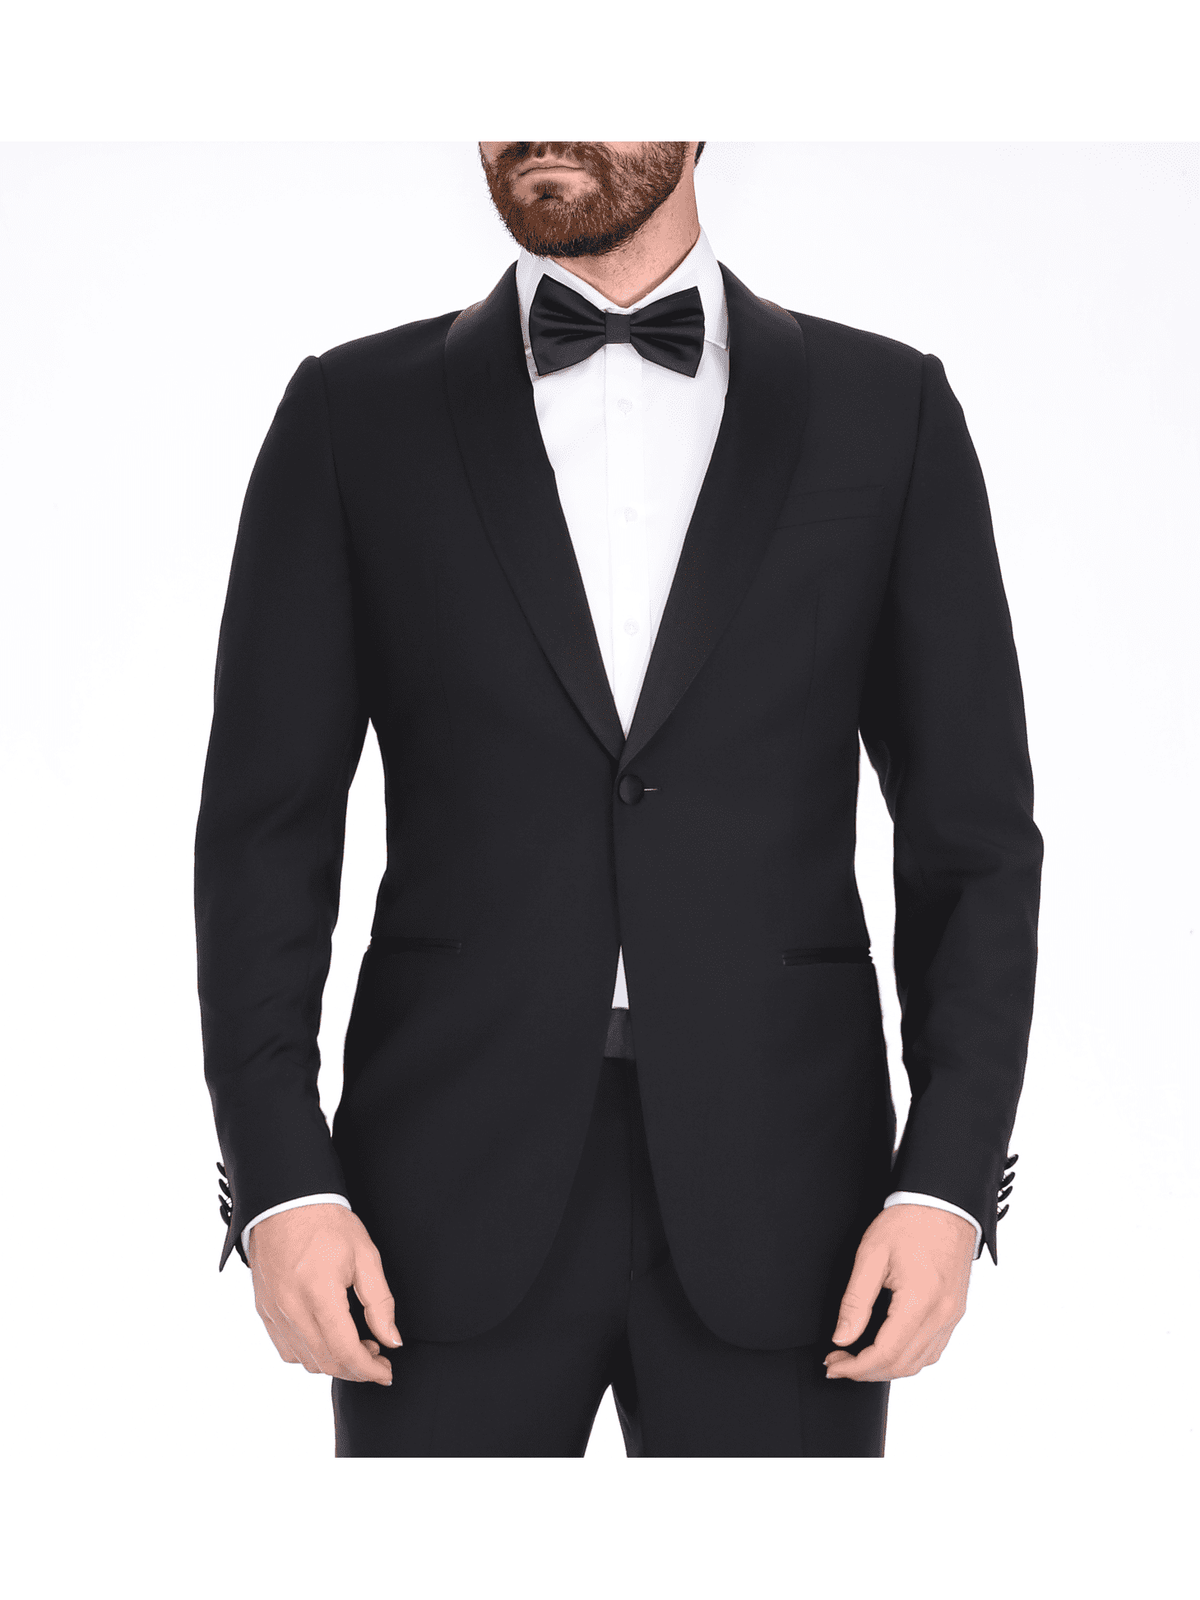 Blujacket TUXEDOS Blujacket Mens Solid Black 100% Wool Trim Fit Tuxedo Suit With Satin Shawl Lapel